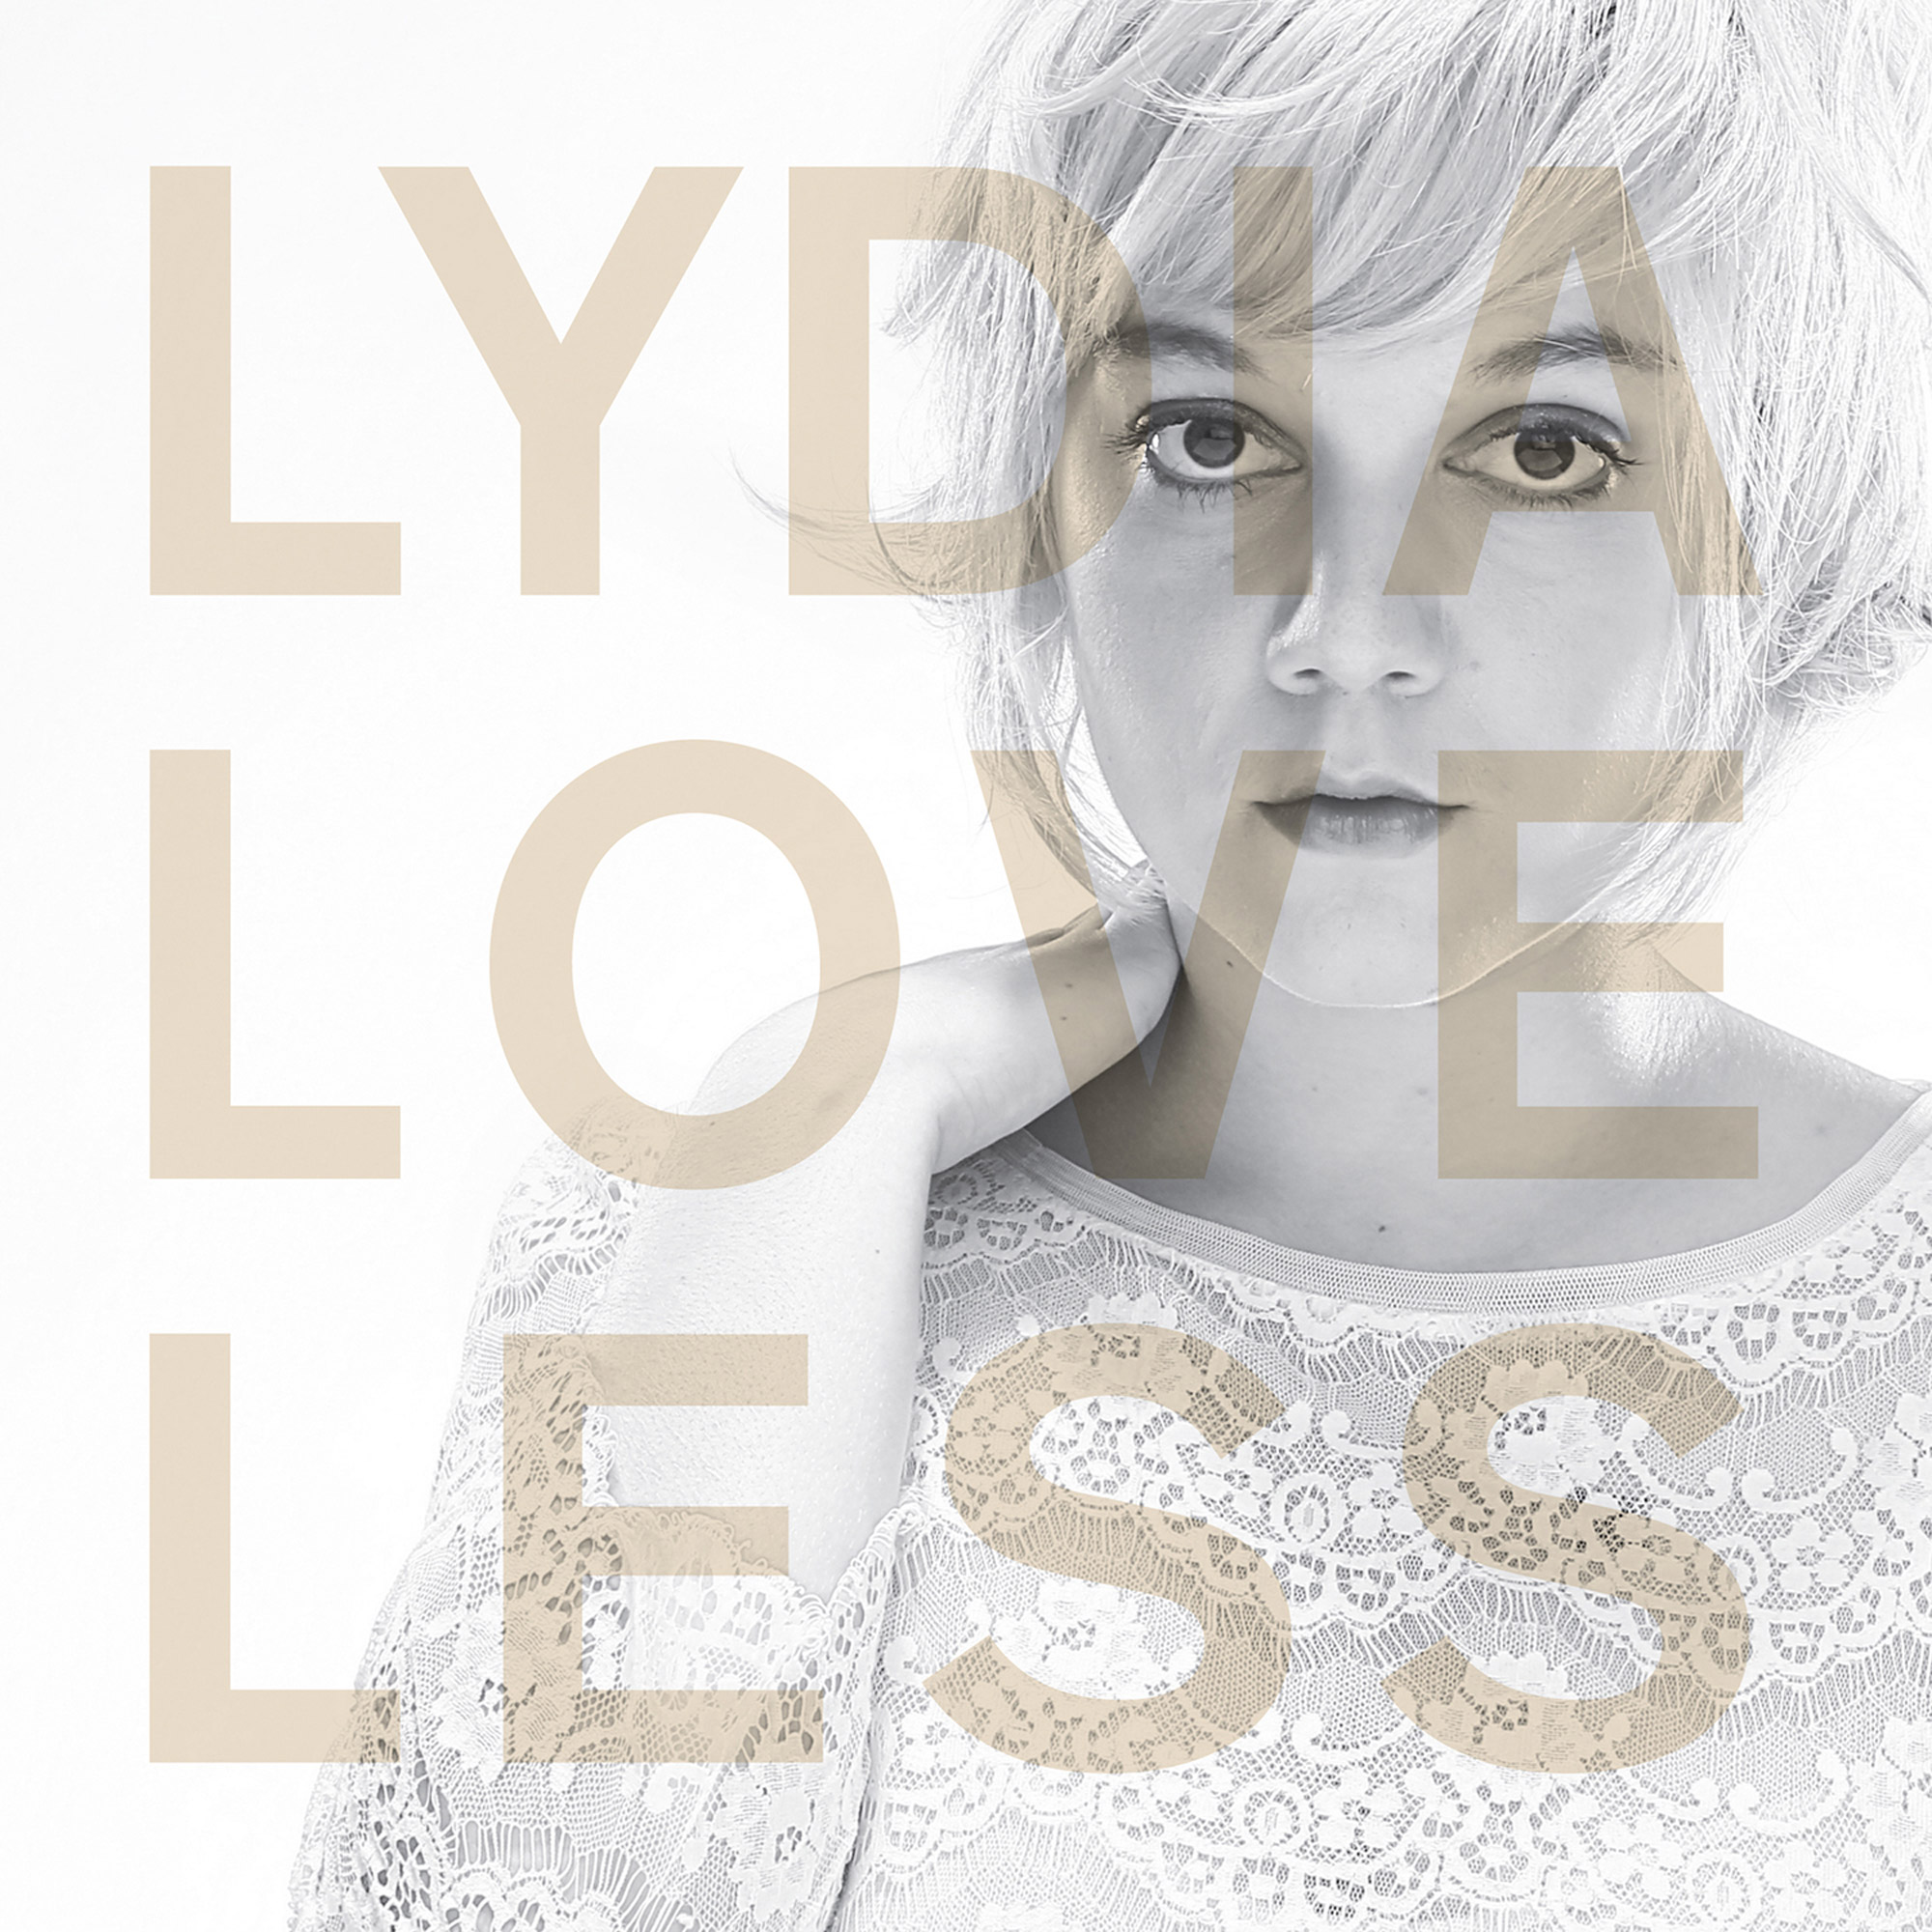  Lydia Loveless album cover design and photography 